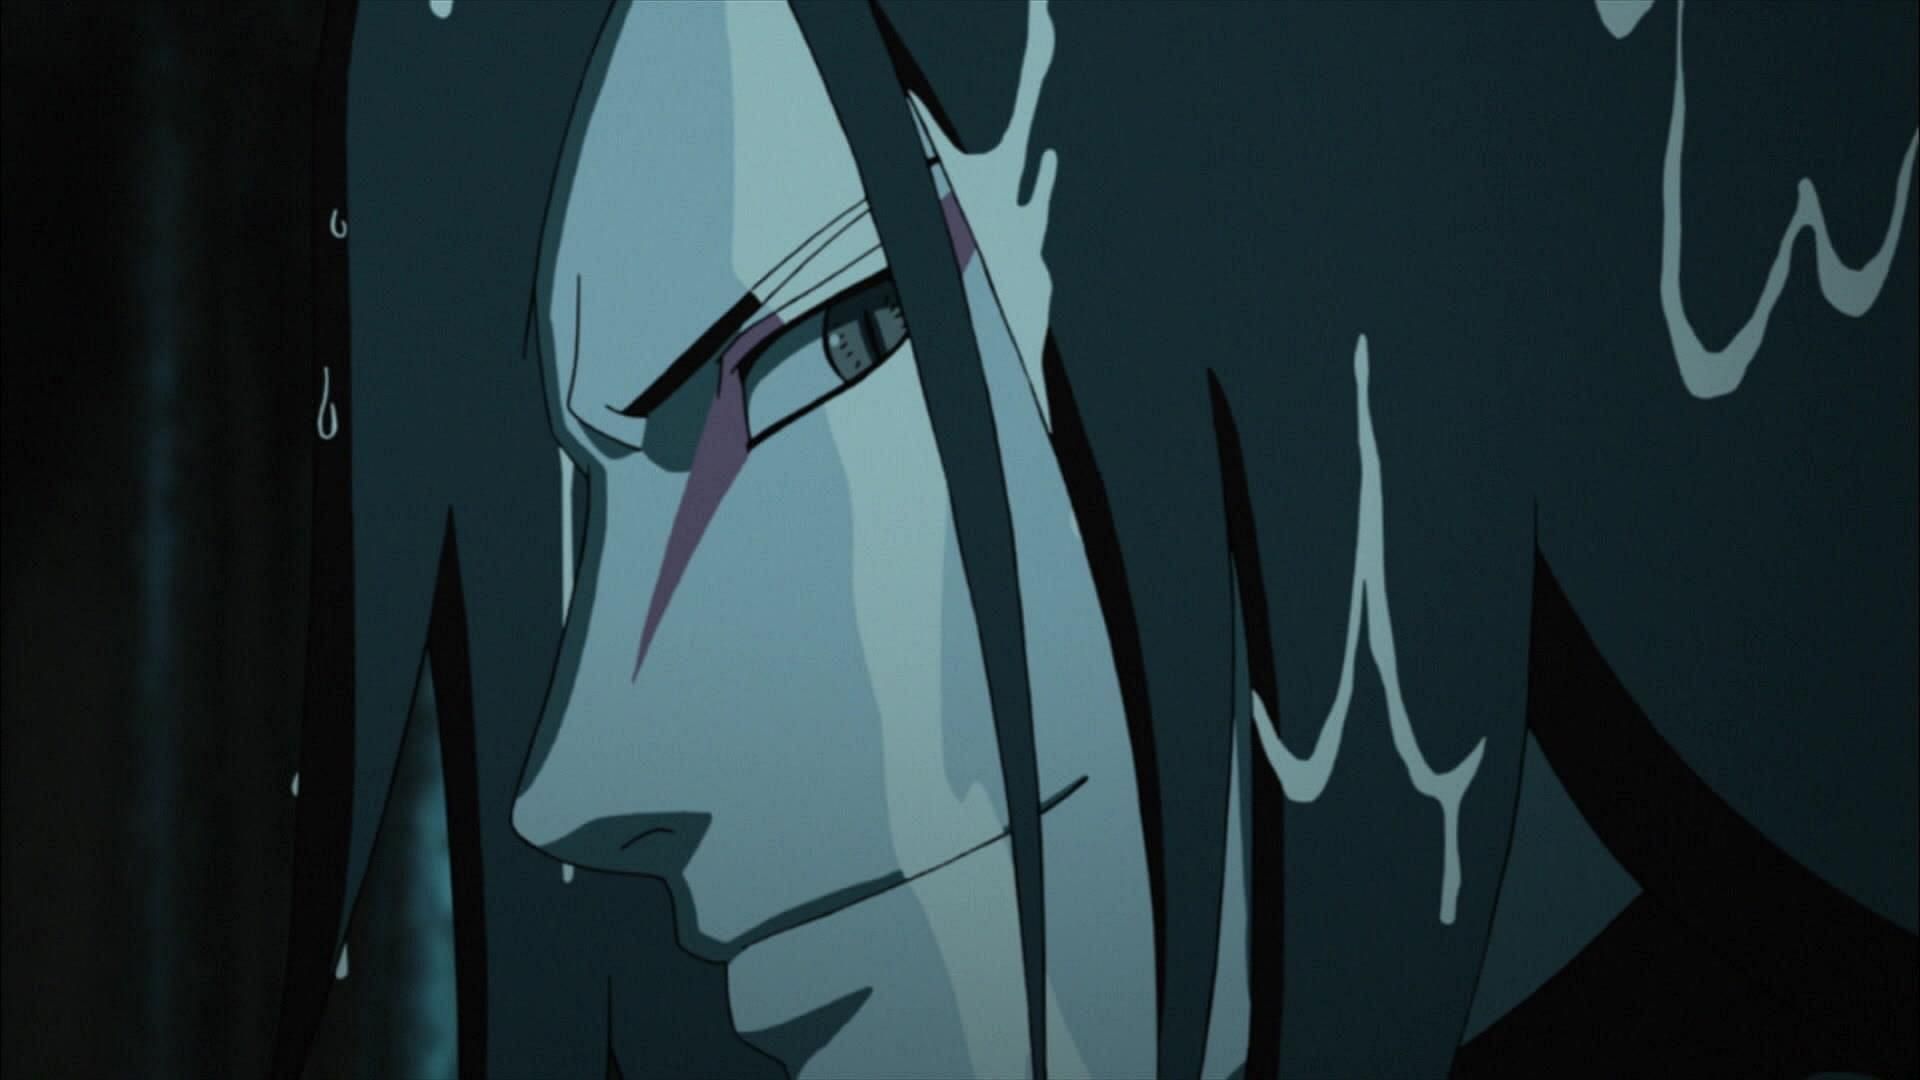 Orochimaru - one of the most nefarious Naruto characters that fans knew (Image via Studio Pierrot)